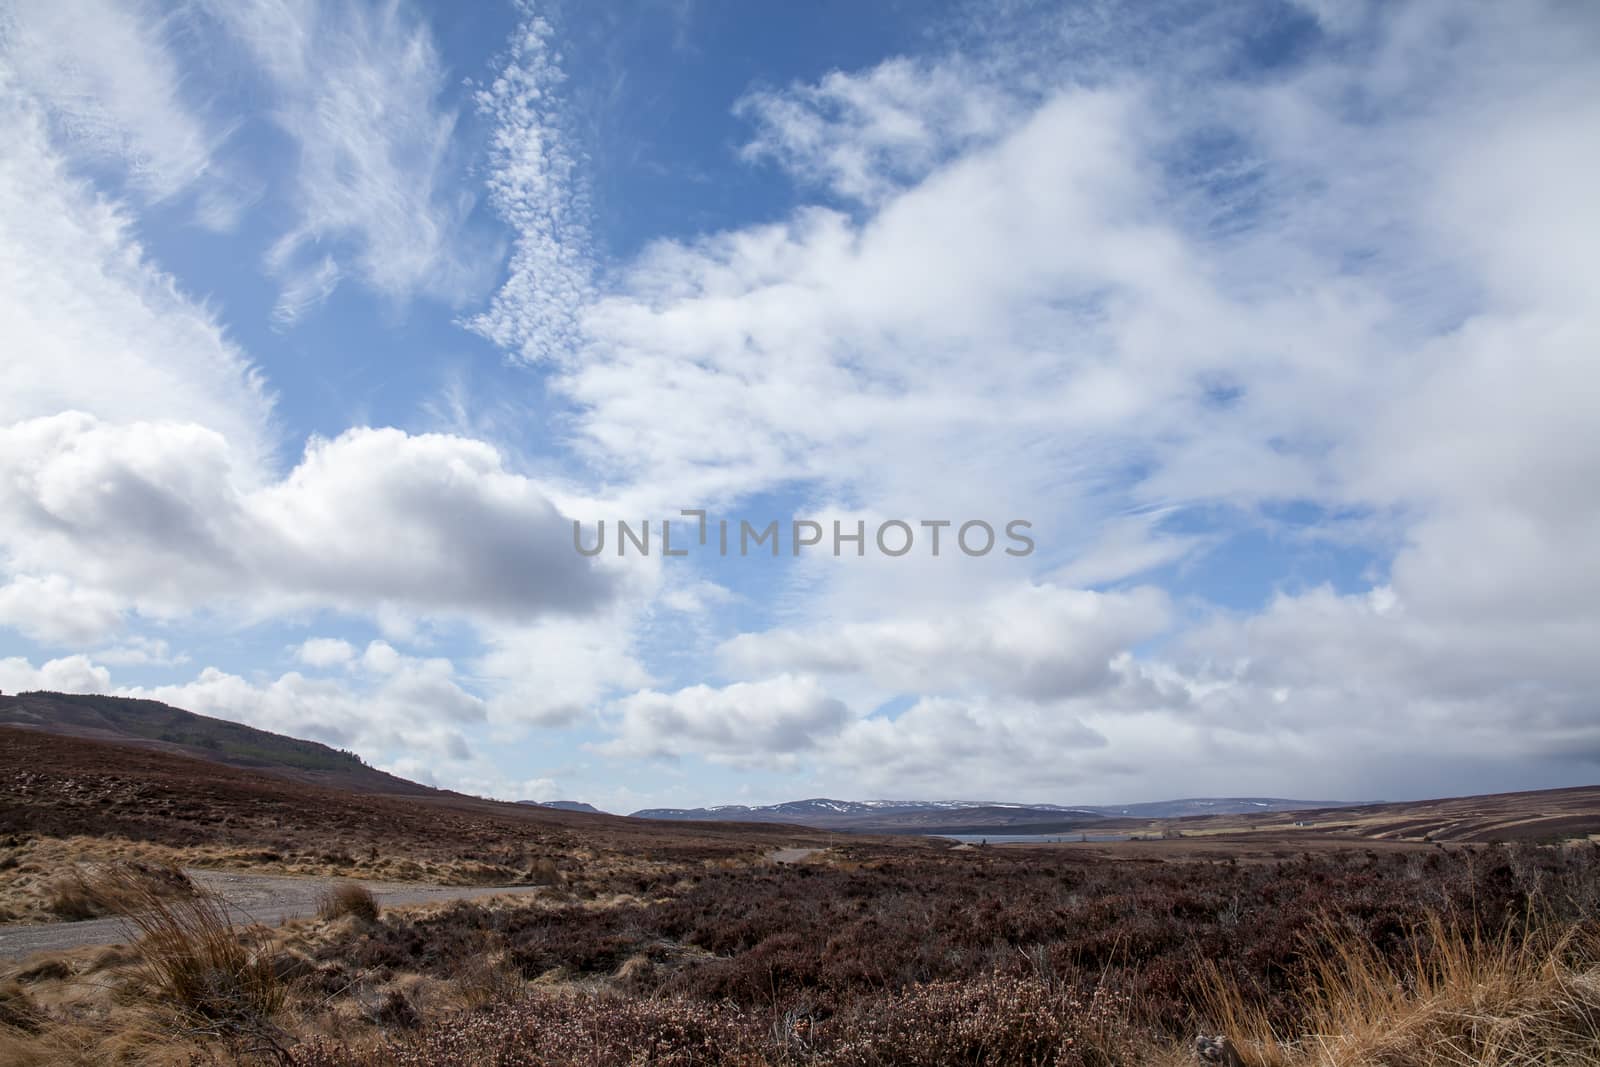 Cloudy and blue sky and landscape near Lochindorb in the Scottish Highlands, during March.